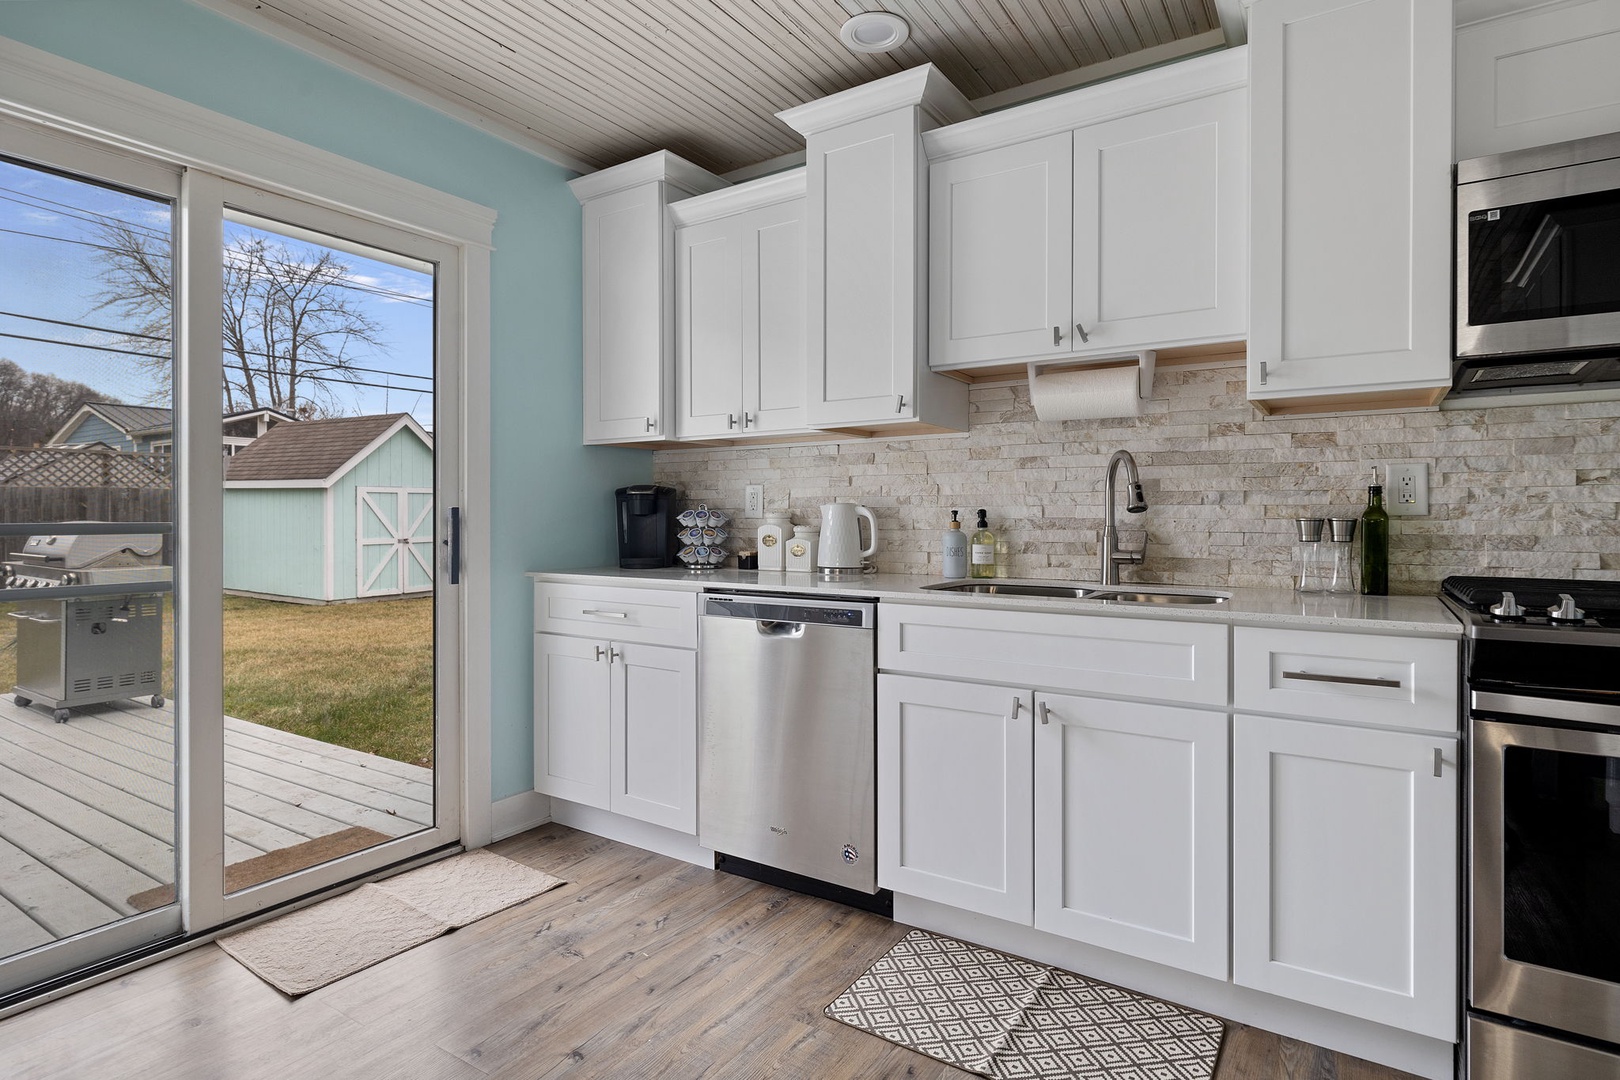 The kitchen features high-quality stainless-steel appliances and all the basics.